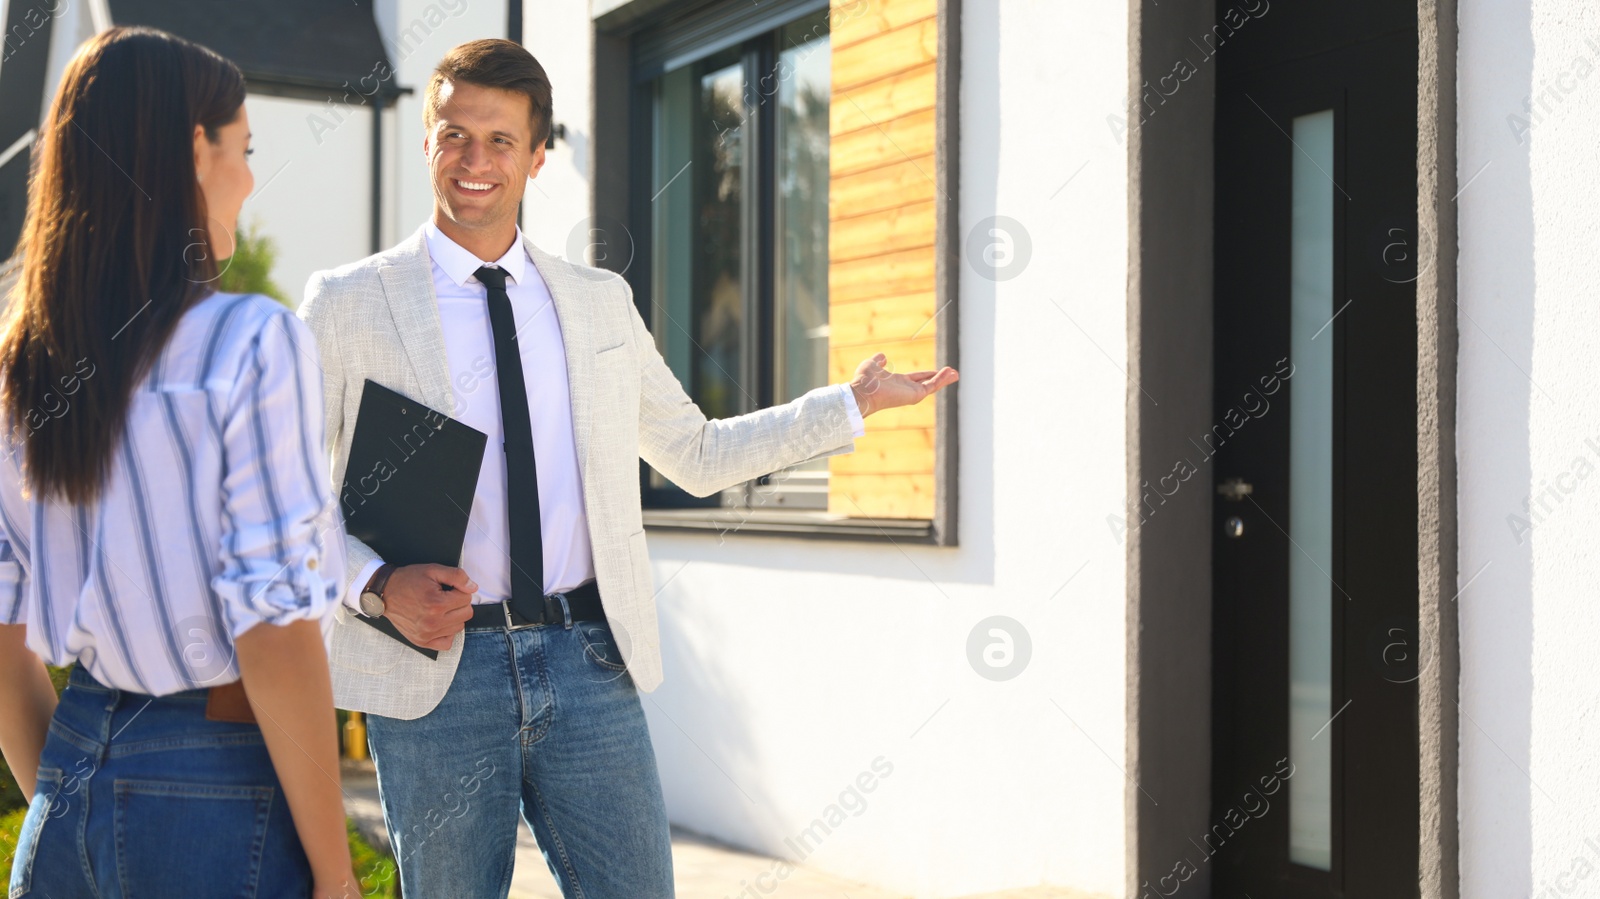 Photo of Real estate agent showing house to young woman outdoors